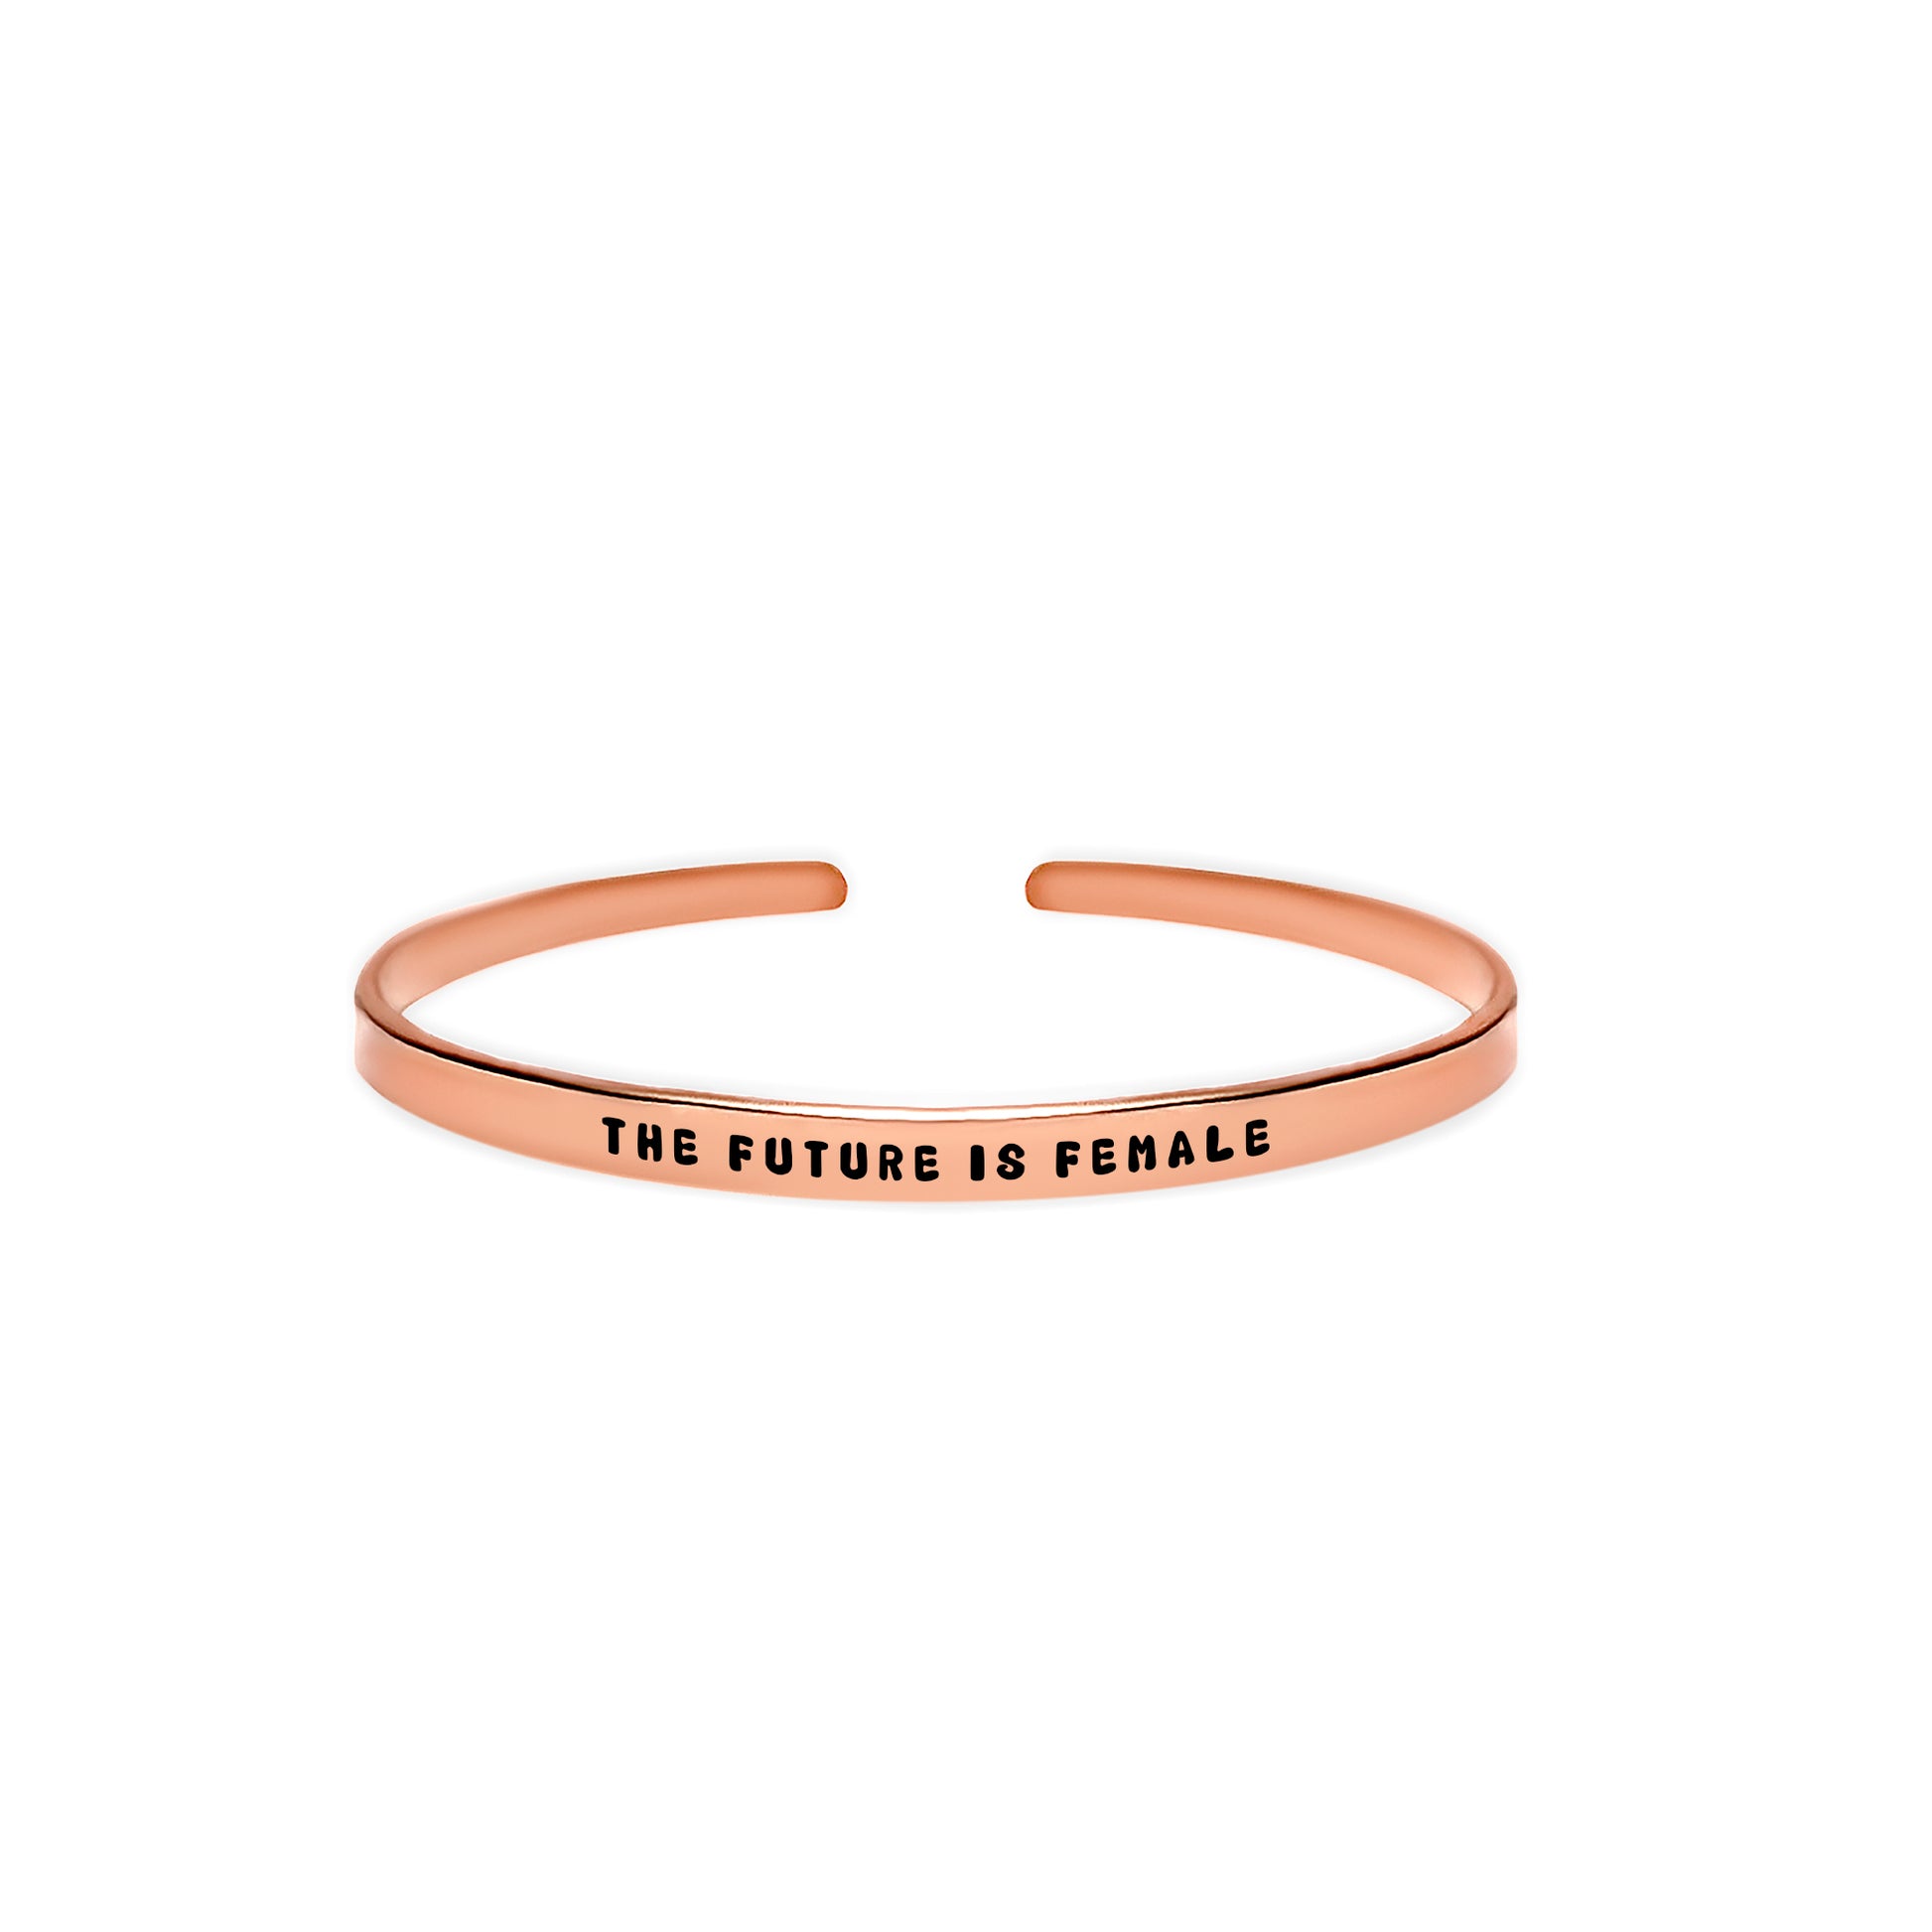 ‘The future is female’ women are the future inspired quote bracelet